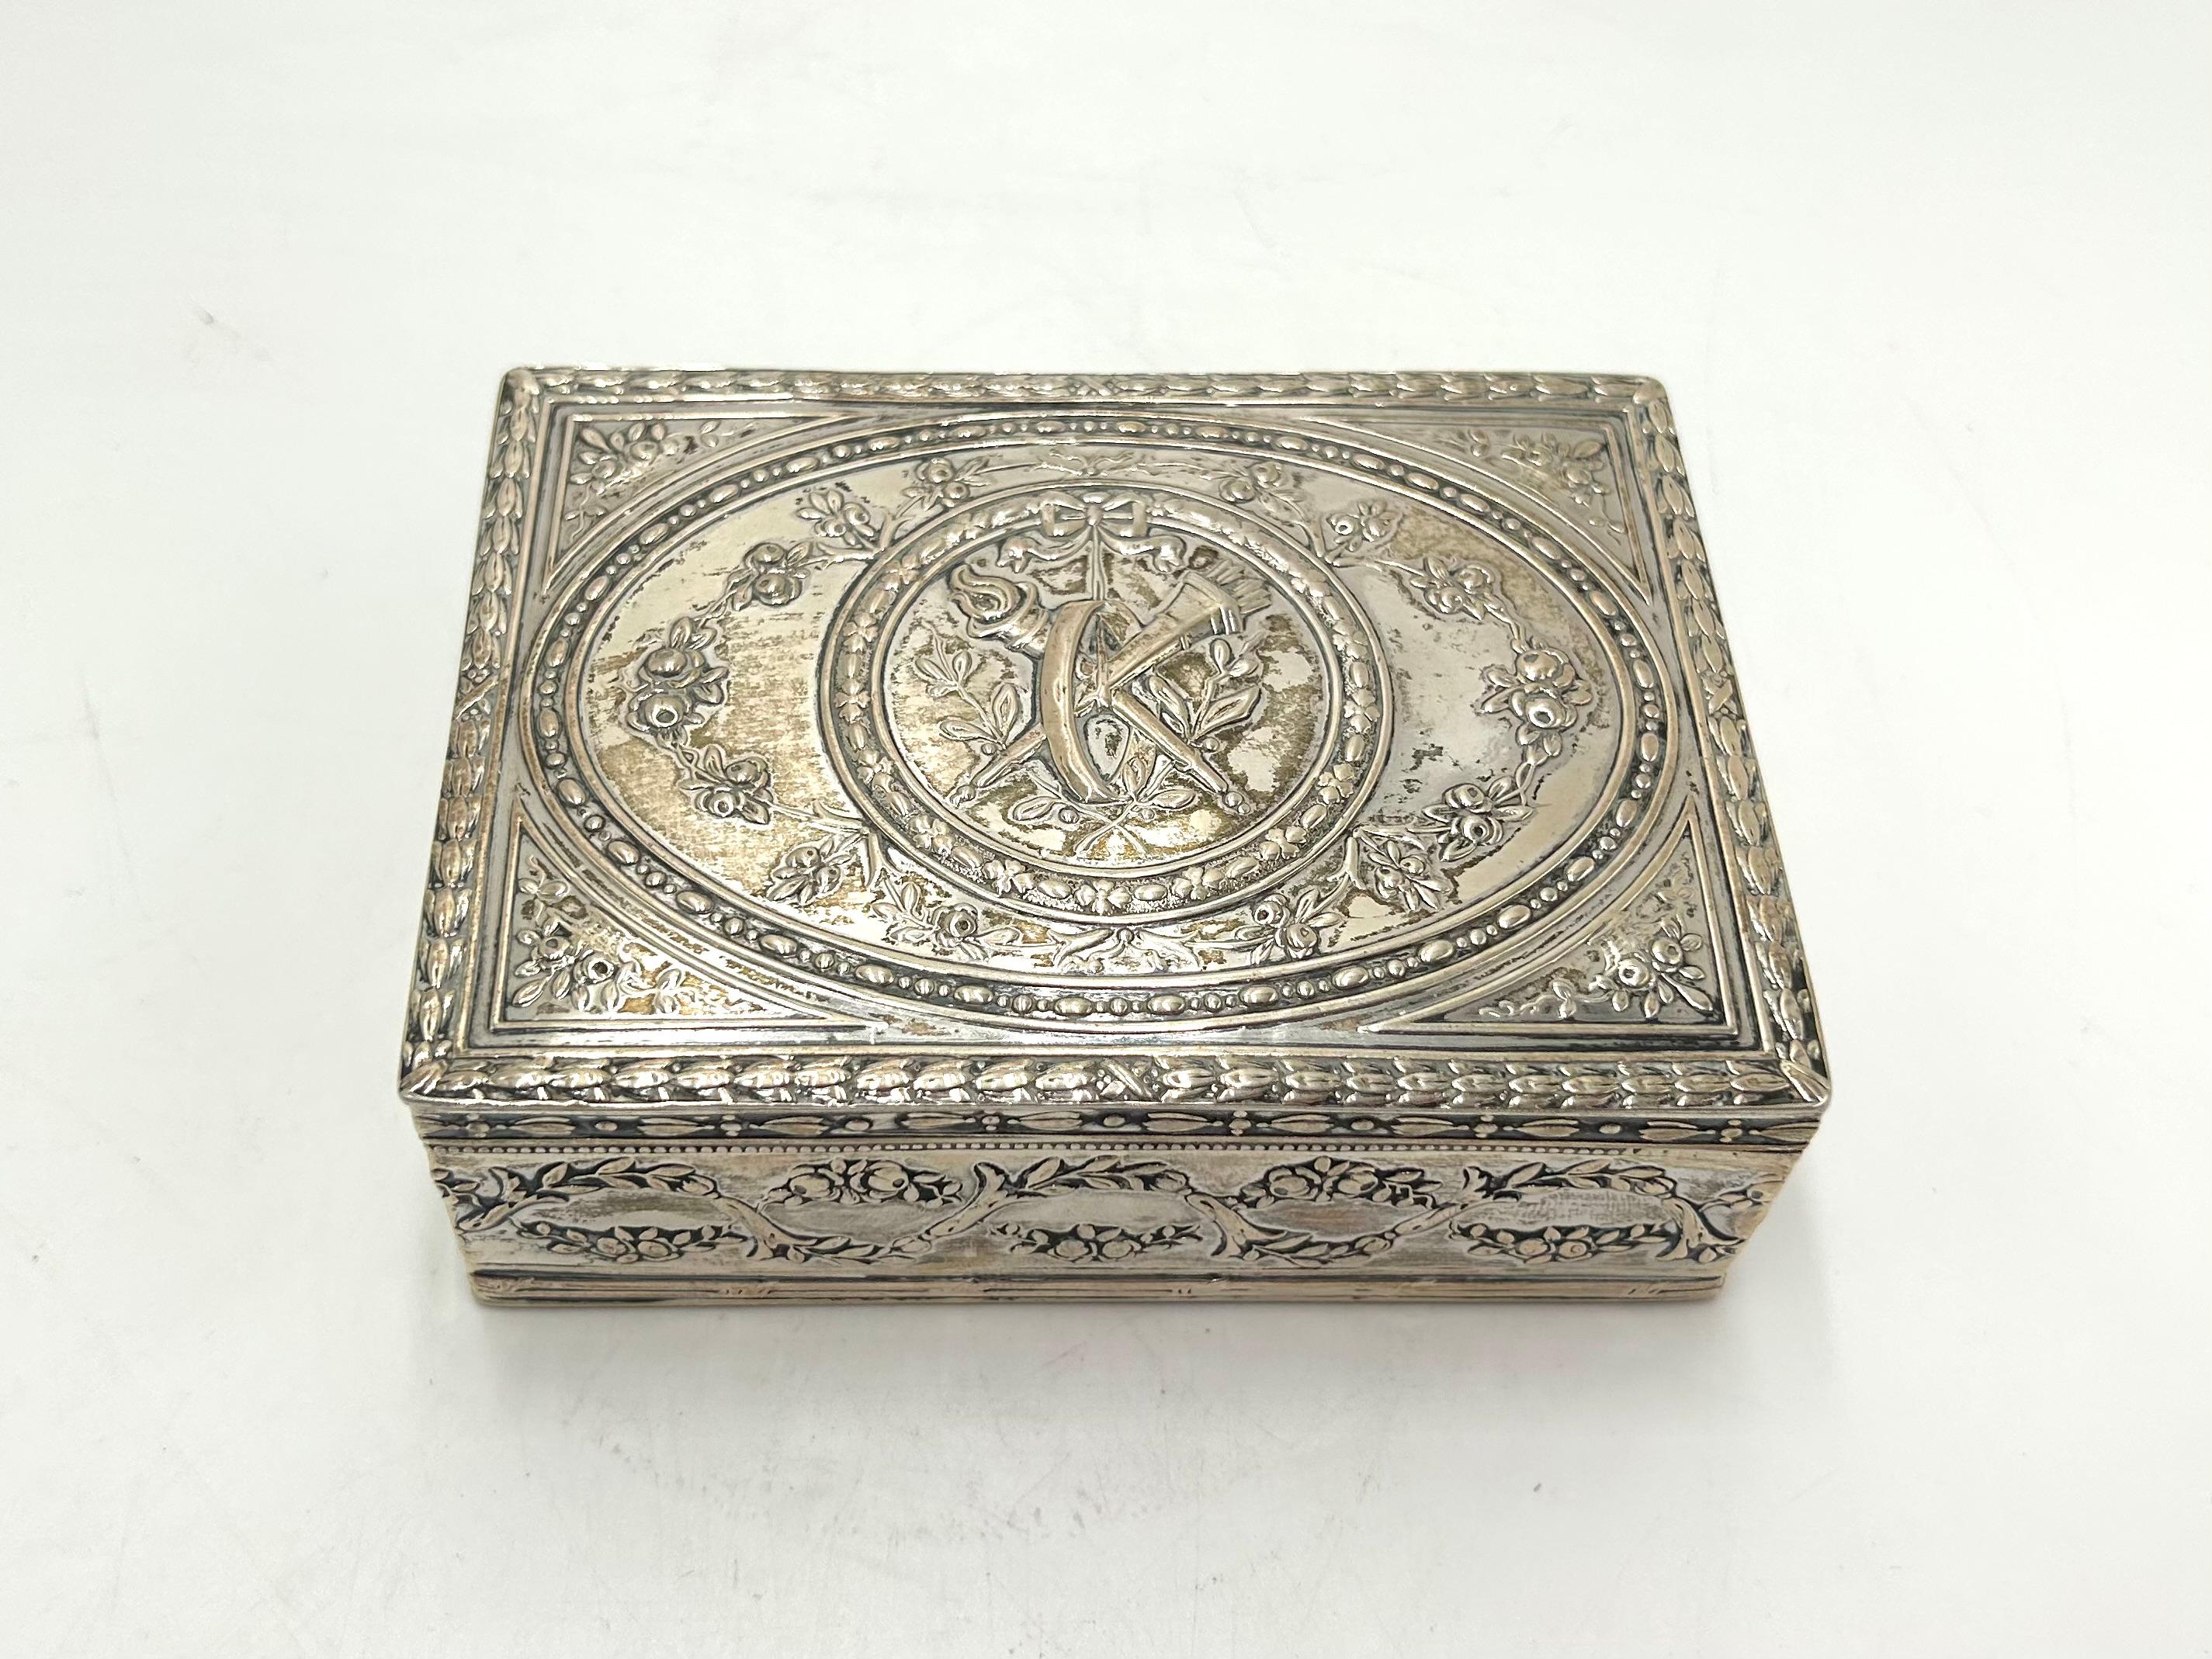 Silver jewelery box.
It comes from Scandinavia in the early 20th century.
Silver fineness 830.
Very good condition.
dimensions: height 4cm width 11.5cm depth 9cm.